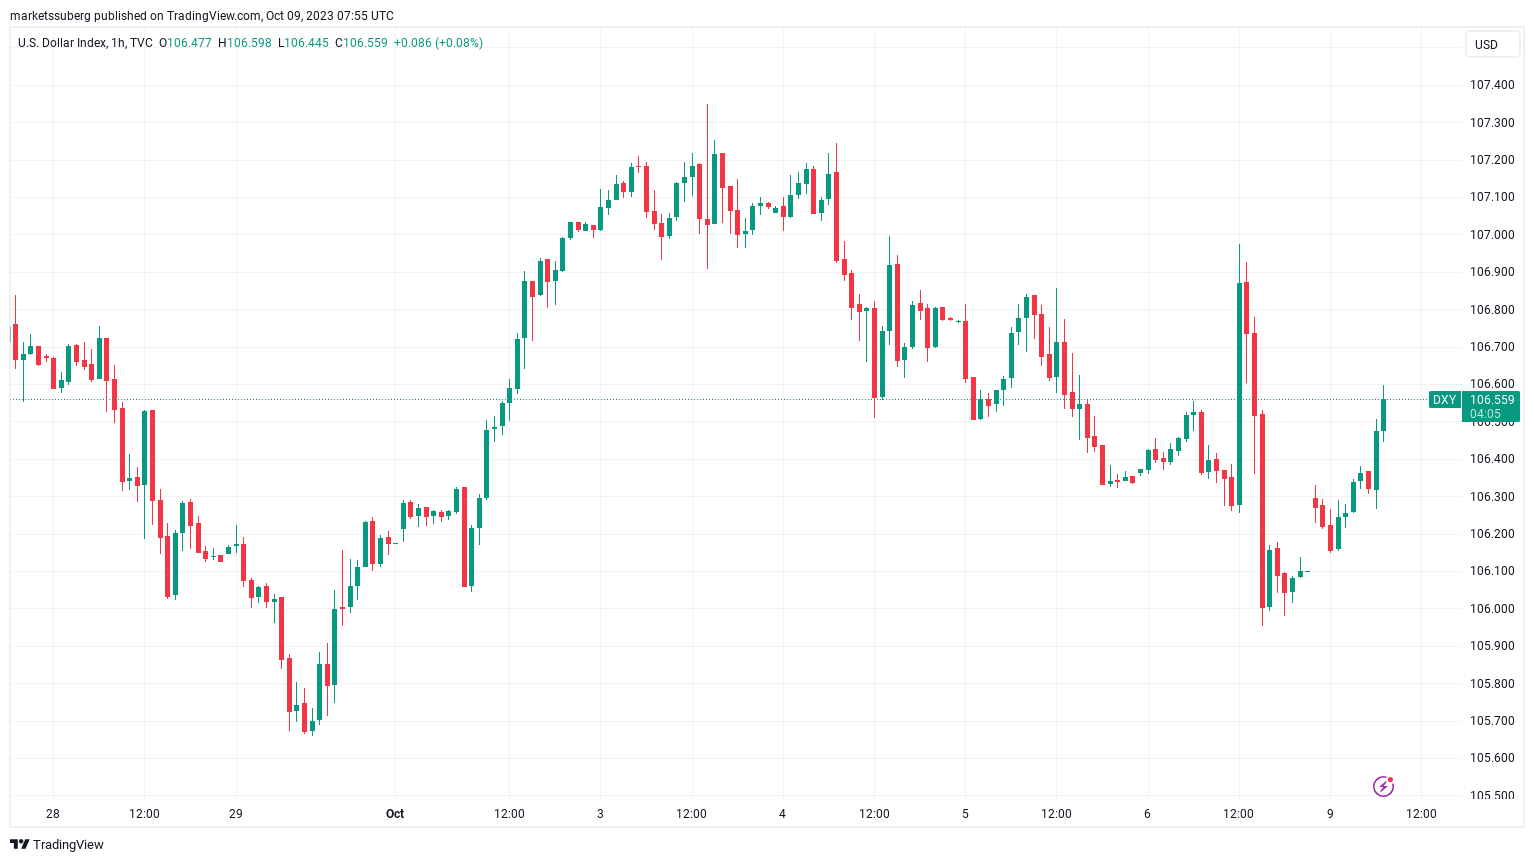 BTC/USD vs. Fed funds futures with 50, 100-week MA chart. Sour